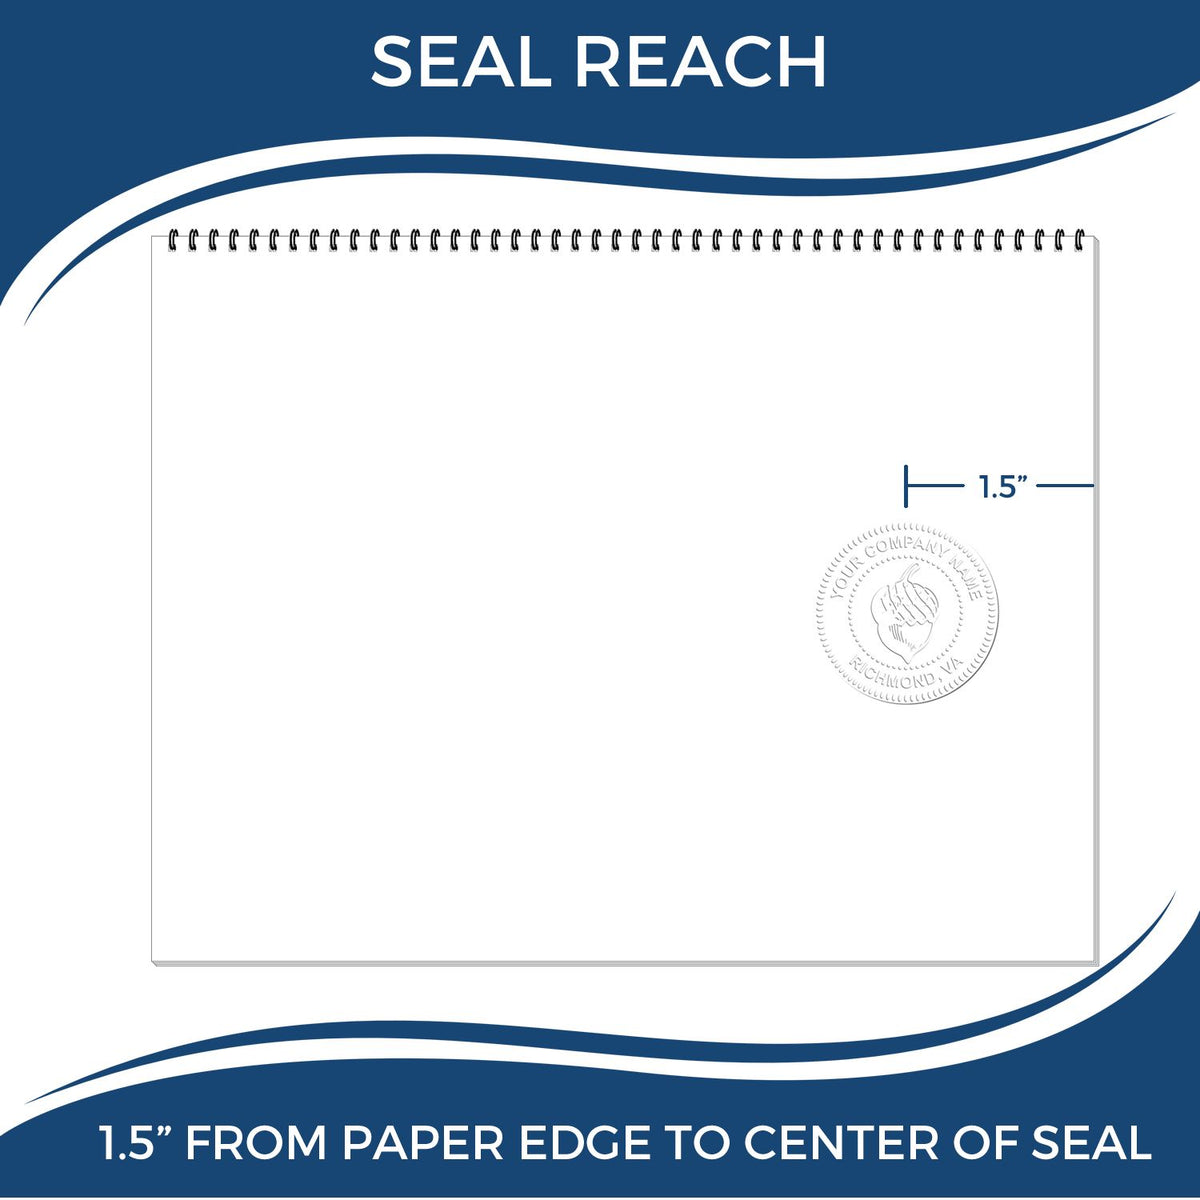 An infographic showing the seal reach which is represented by a ruler and a miniature seal image of the Soft New Hampshire Professional Engineer Seal